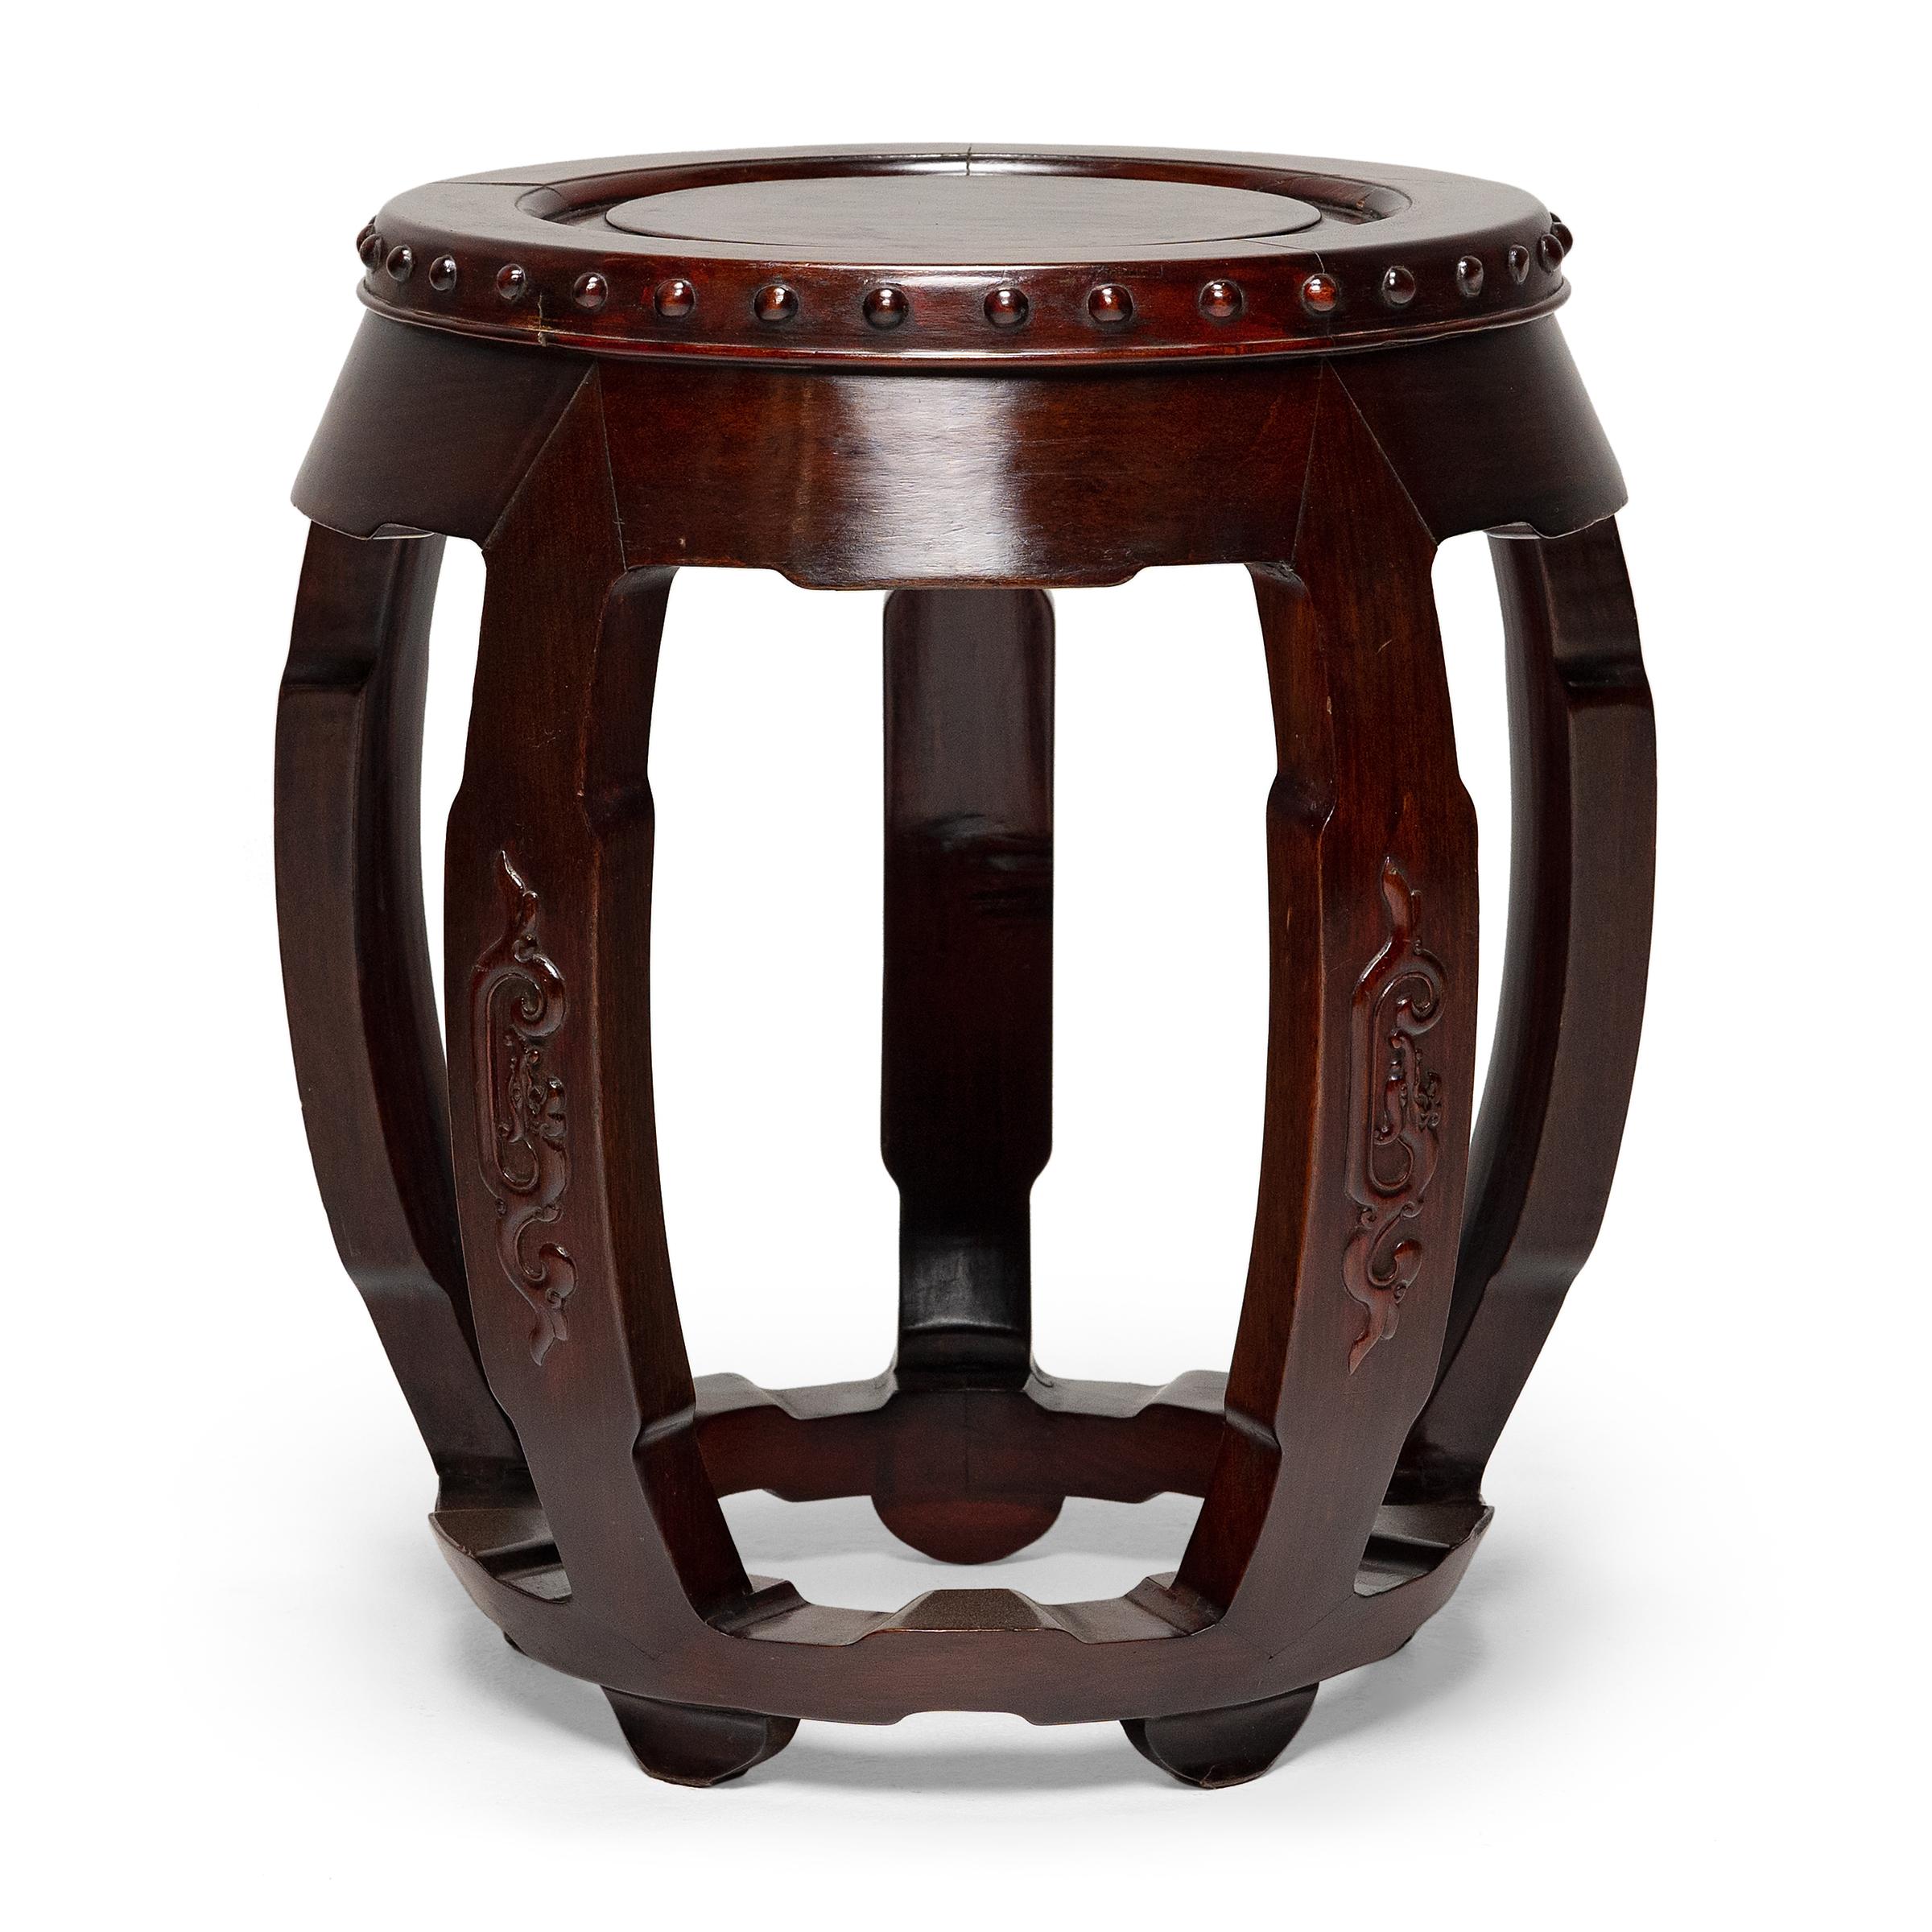 The stool is a central fixture of Chinese furniture culture. Found in a variety of materials and forms, the stool transcends class lines, as much at home in the provincial courtyard as it is in the grand hall of a wealthy estate. Whether worked from